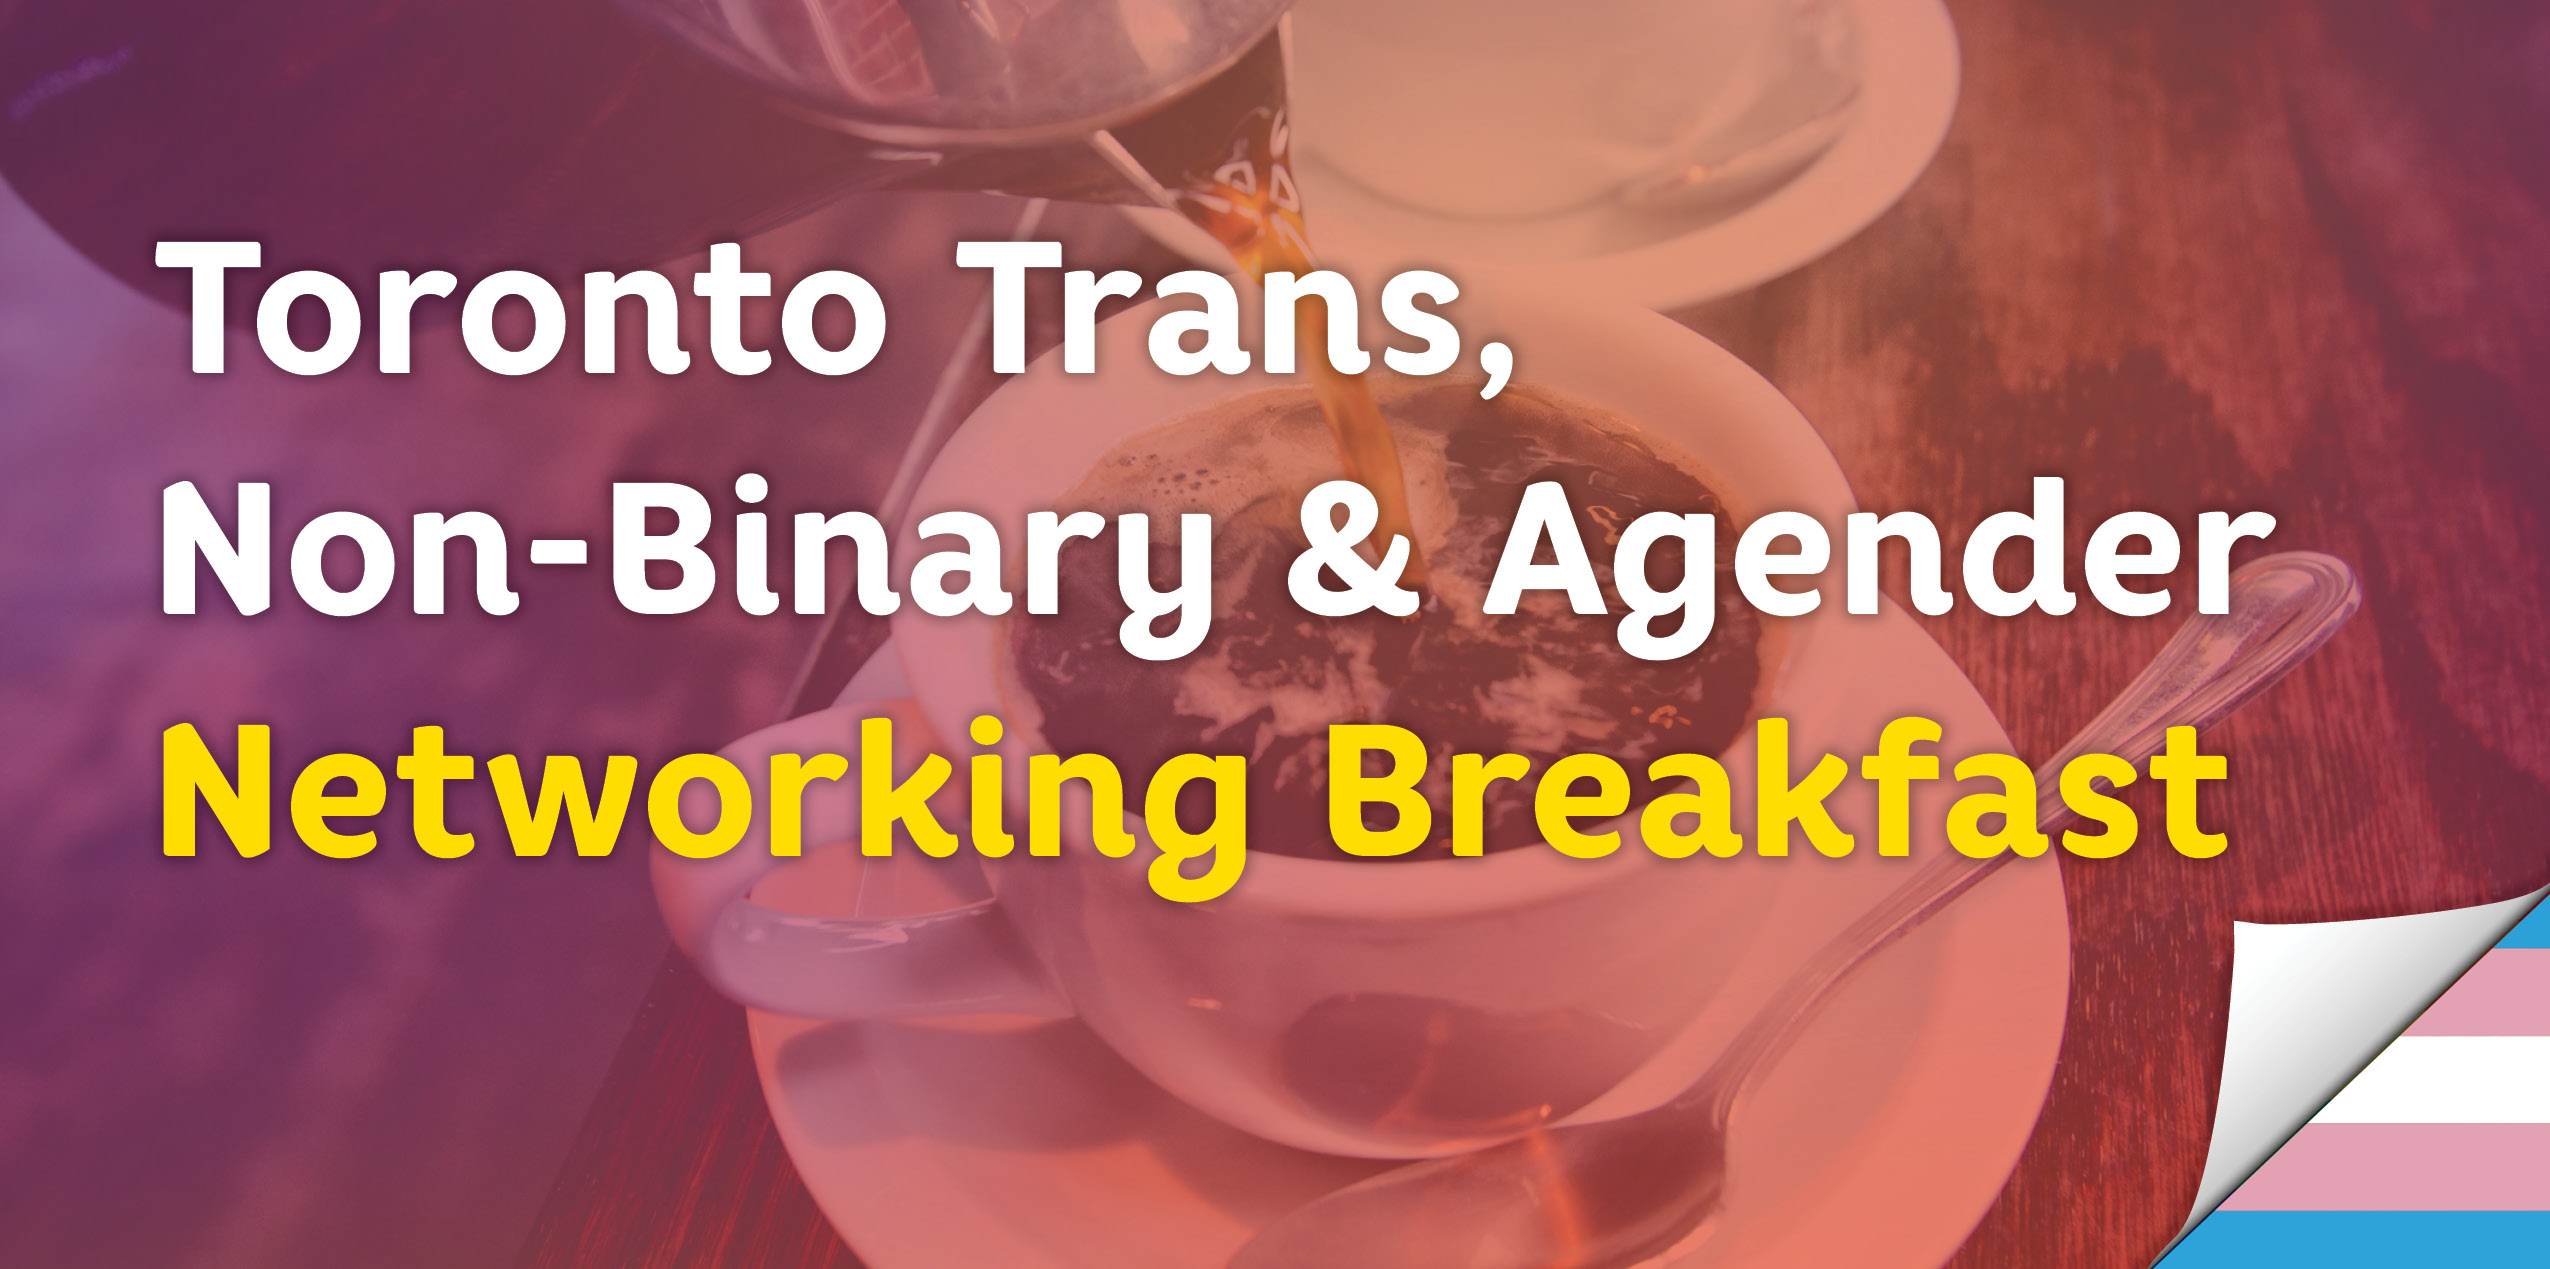 QueerEvents.ca - Toronto event listing - Trans, Non-Binary & Agender Networking Breakfast